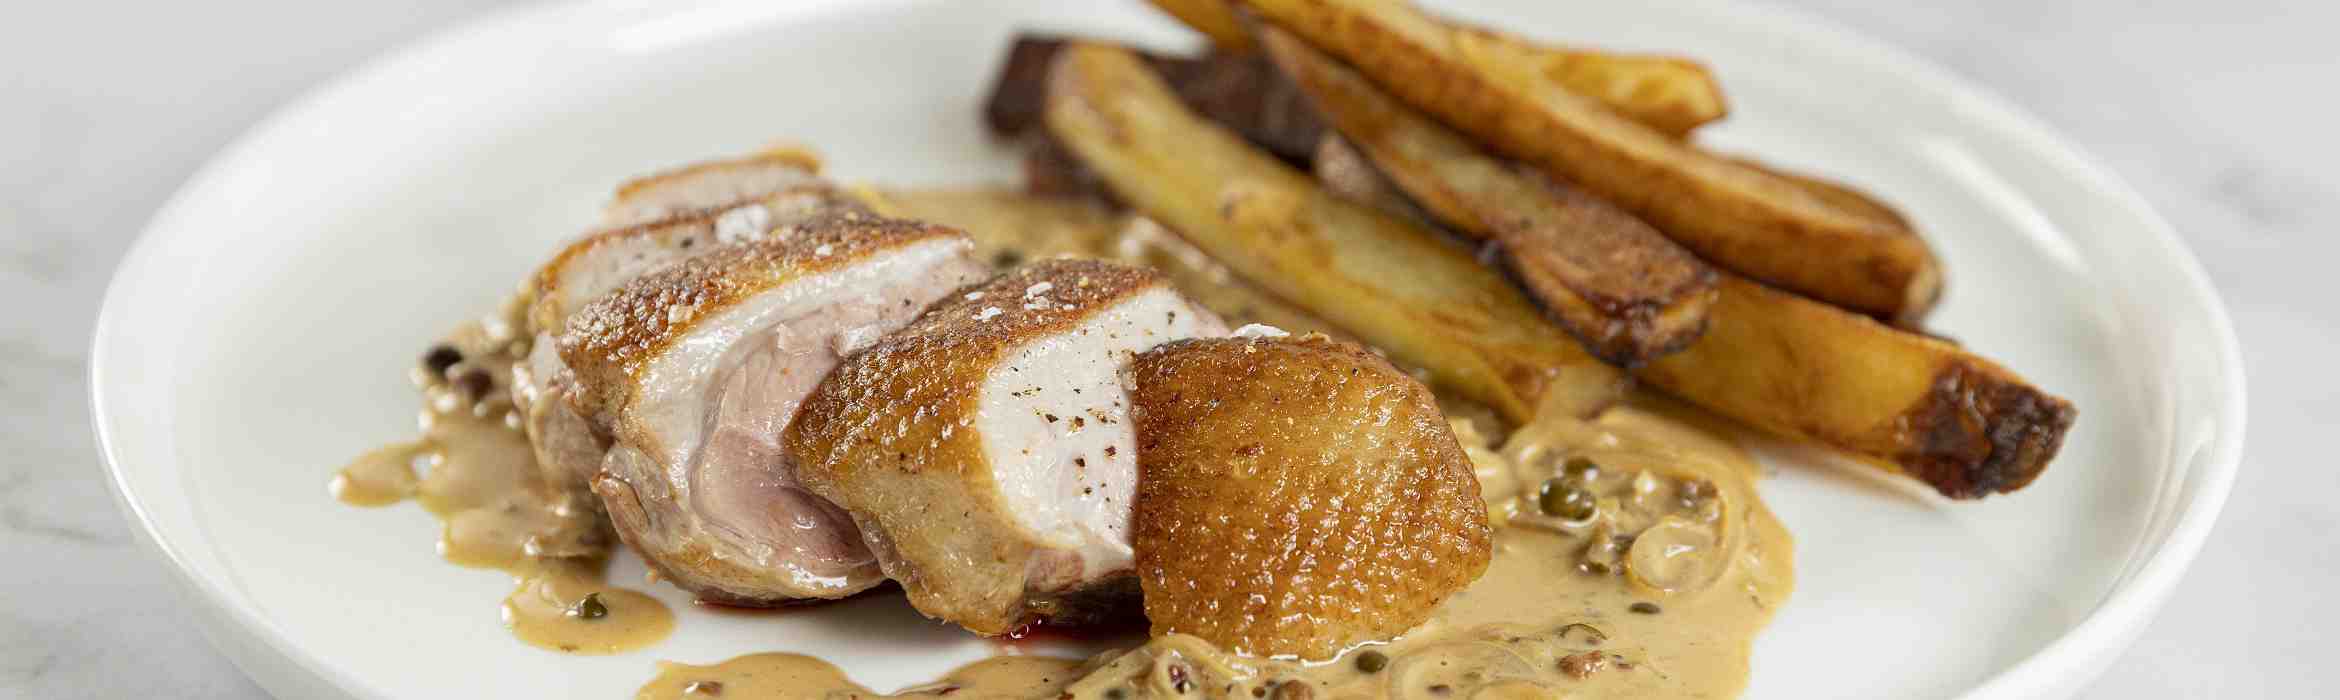 Duck with Peppercorn & Whisky Sauce Recipe